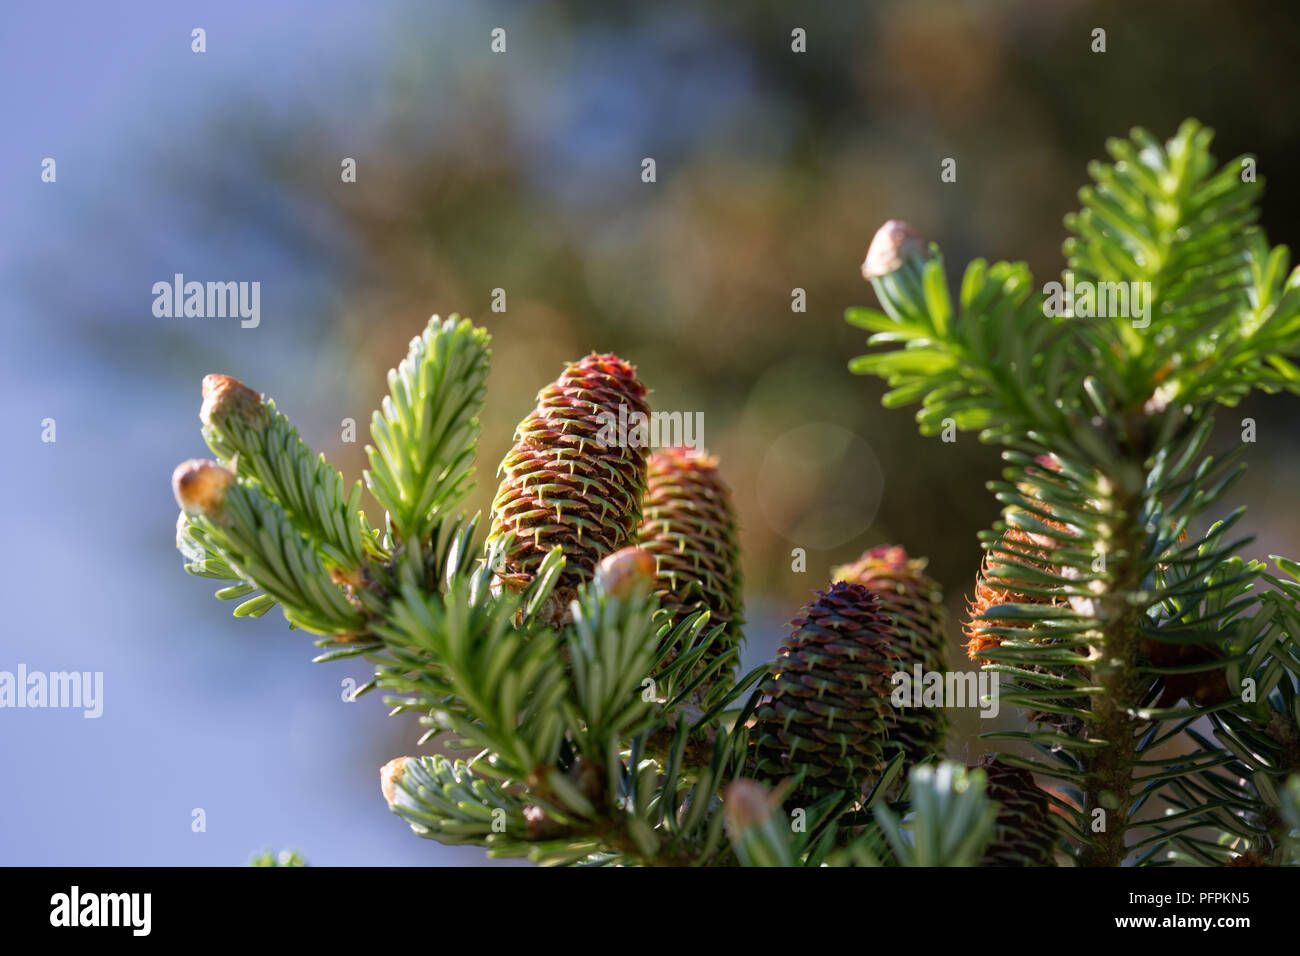 Pine tree branch with cones, Pinus cembra, Eifel Highlands, Germany Several pine tree cones on branch Stock Photo